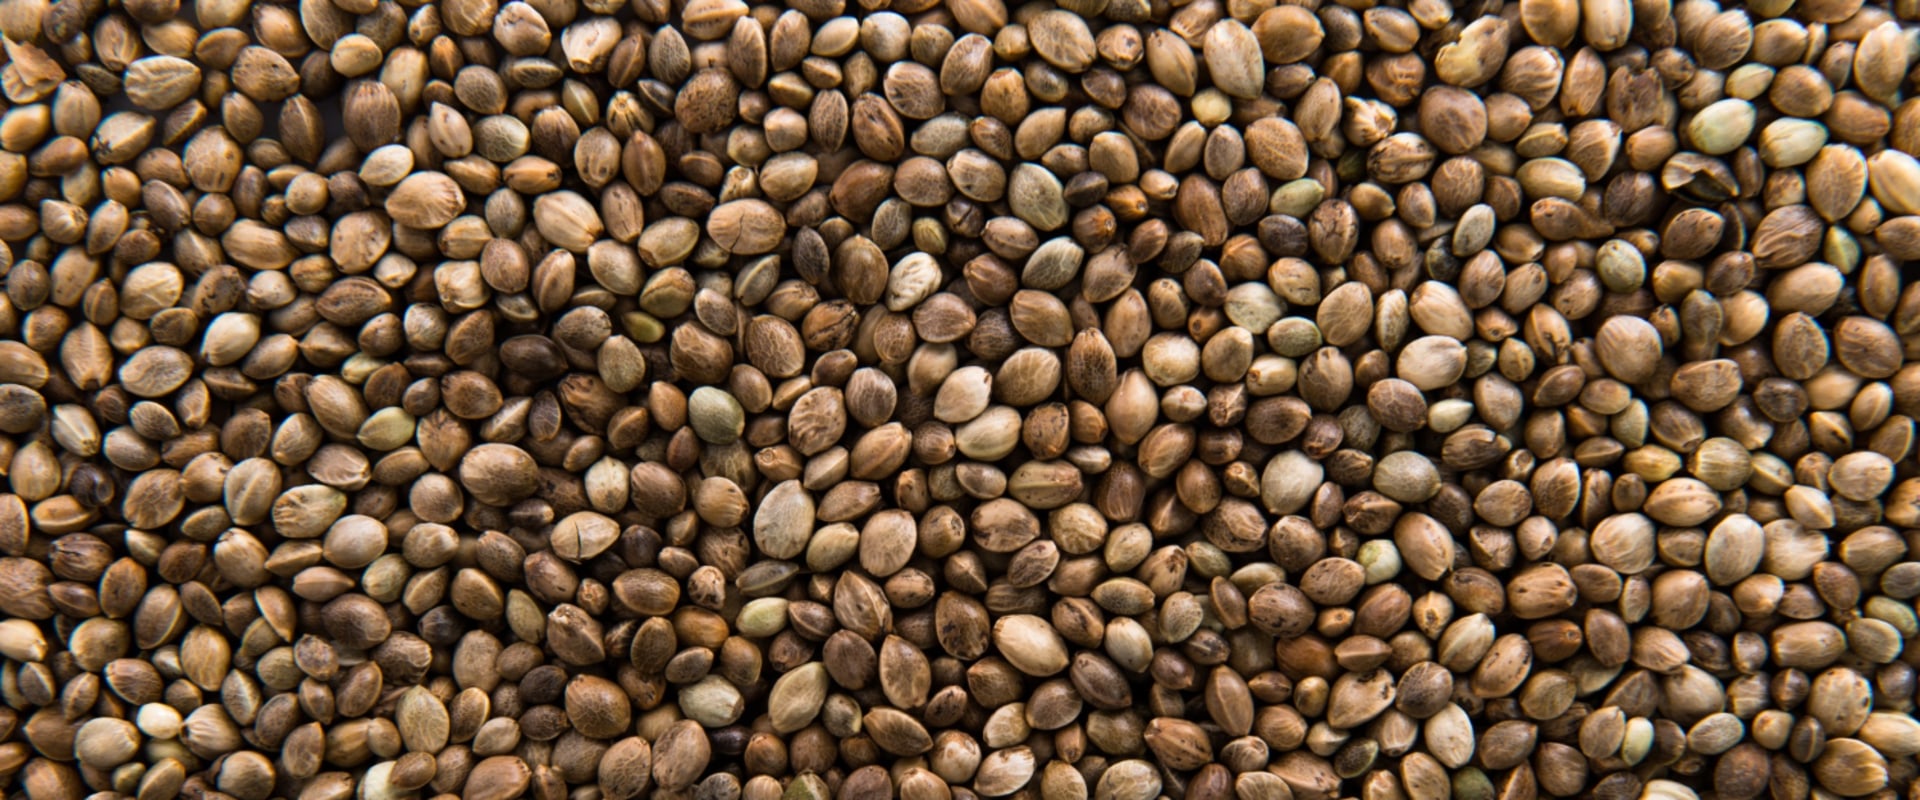 Can Hemp Seeds Help with Depression?